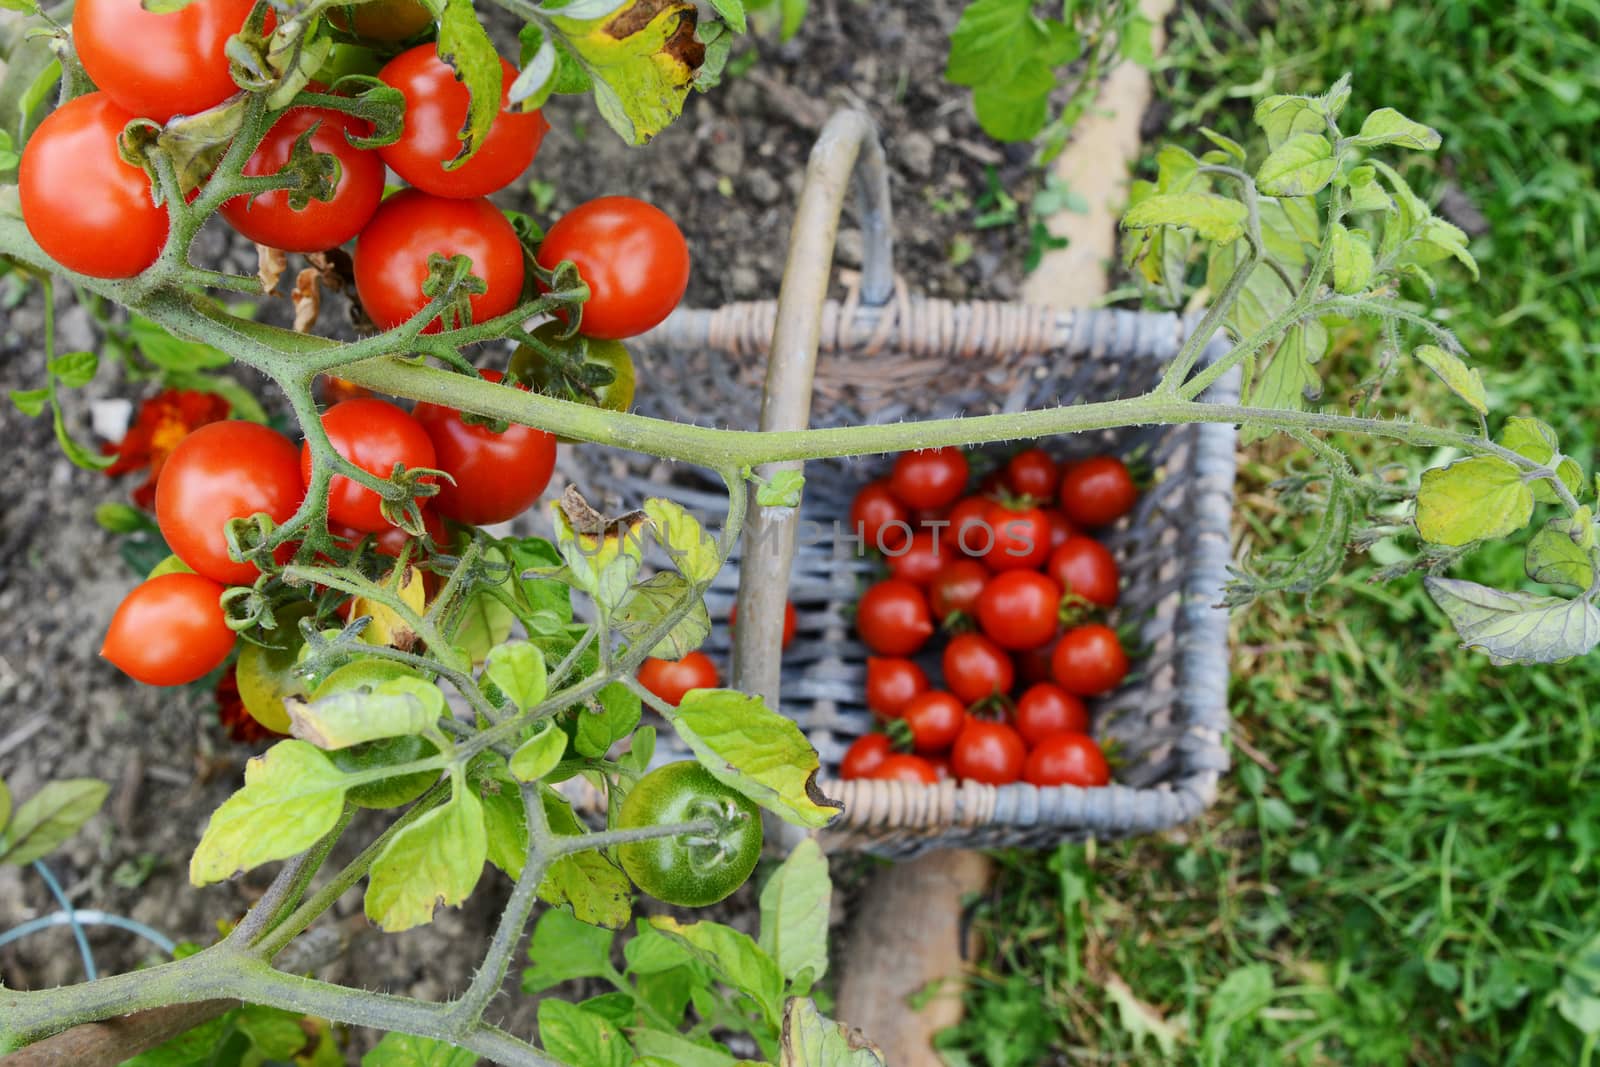 Red and green cherry tomatoes on the vine, in selective focus above a basket of picked fruit in a vegetable garden